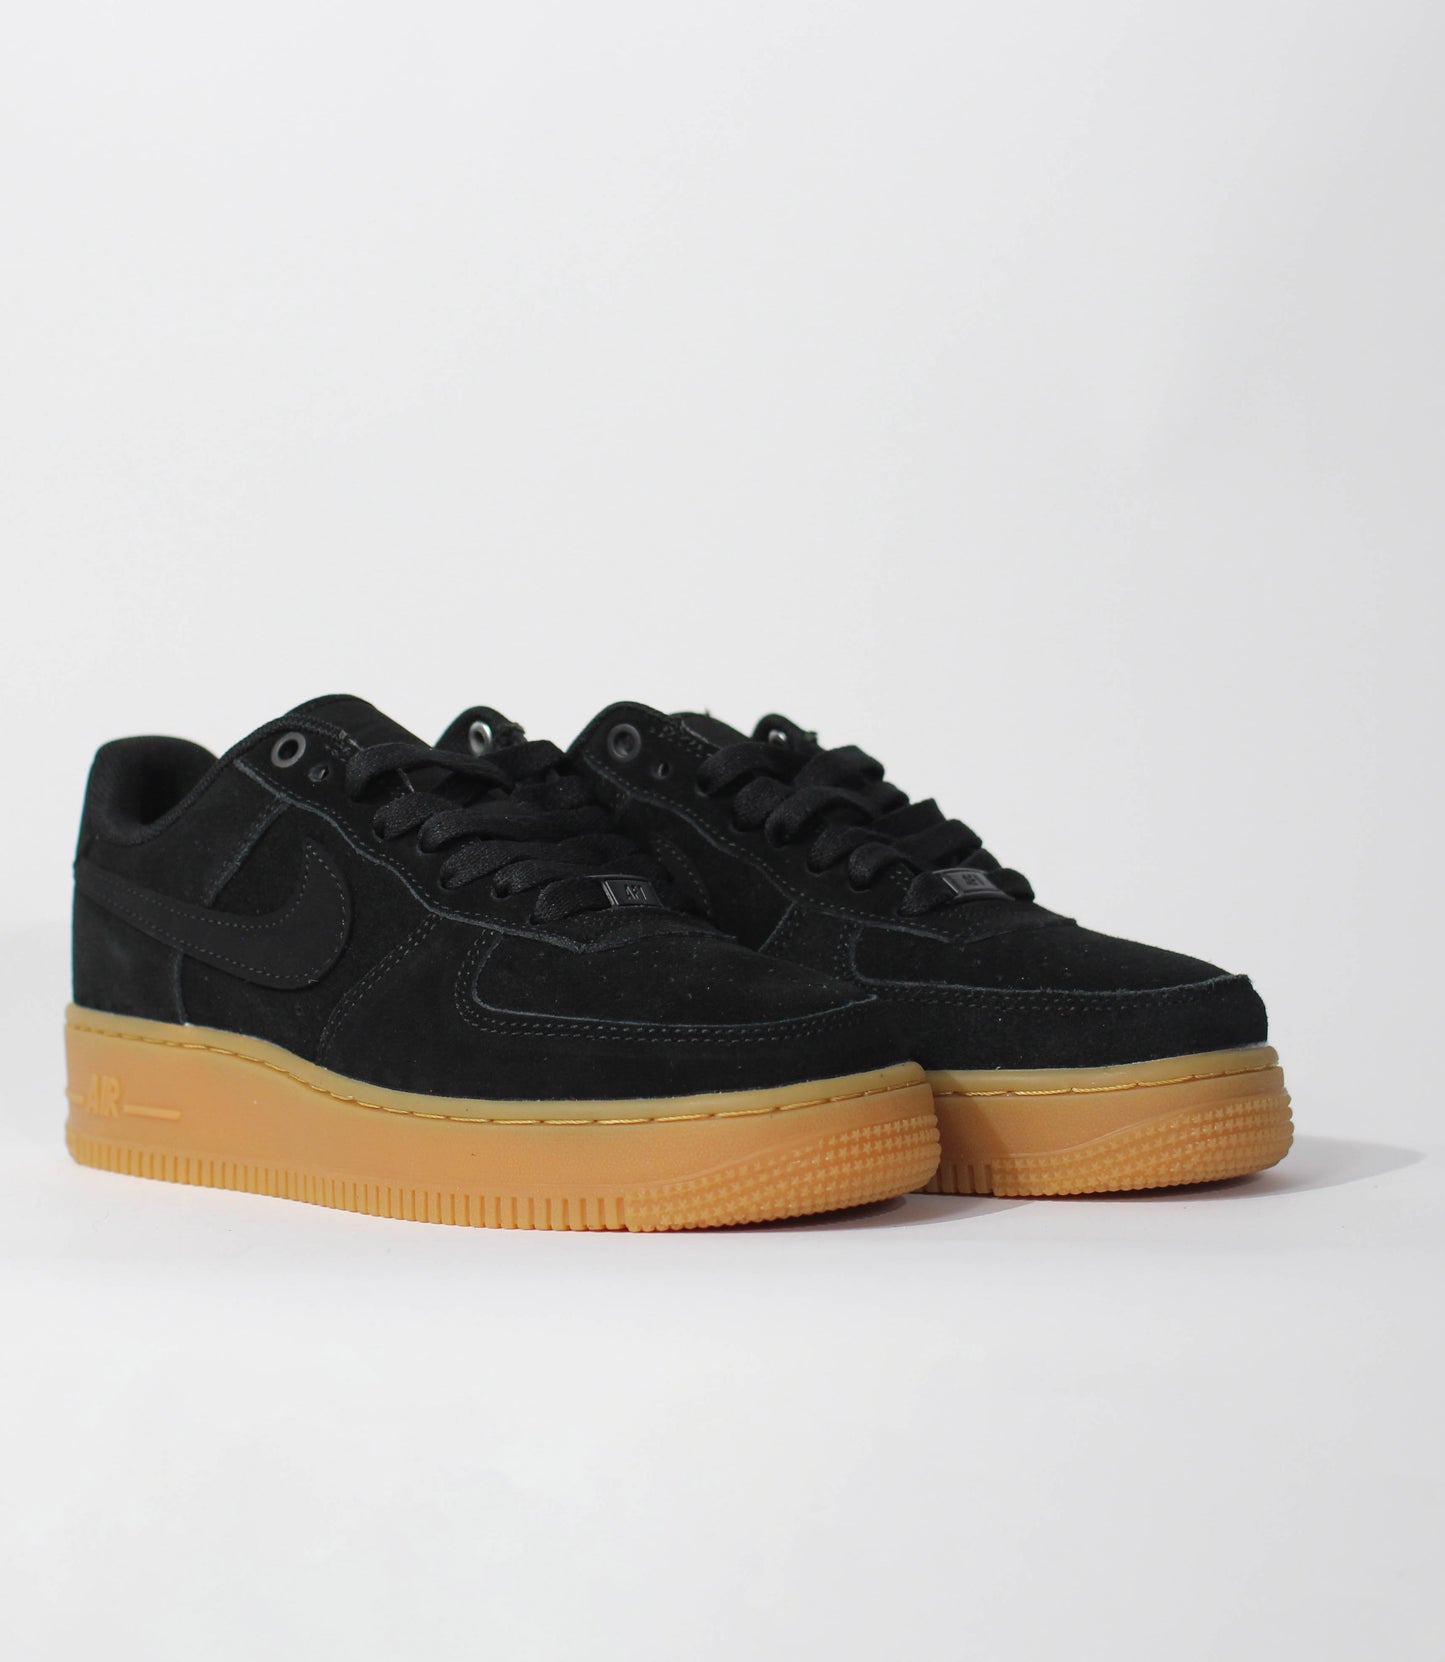 Кроссовки Air Force 1 Low Suede Pack Black - Luxe